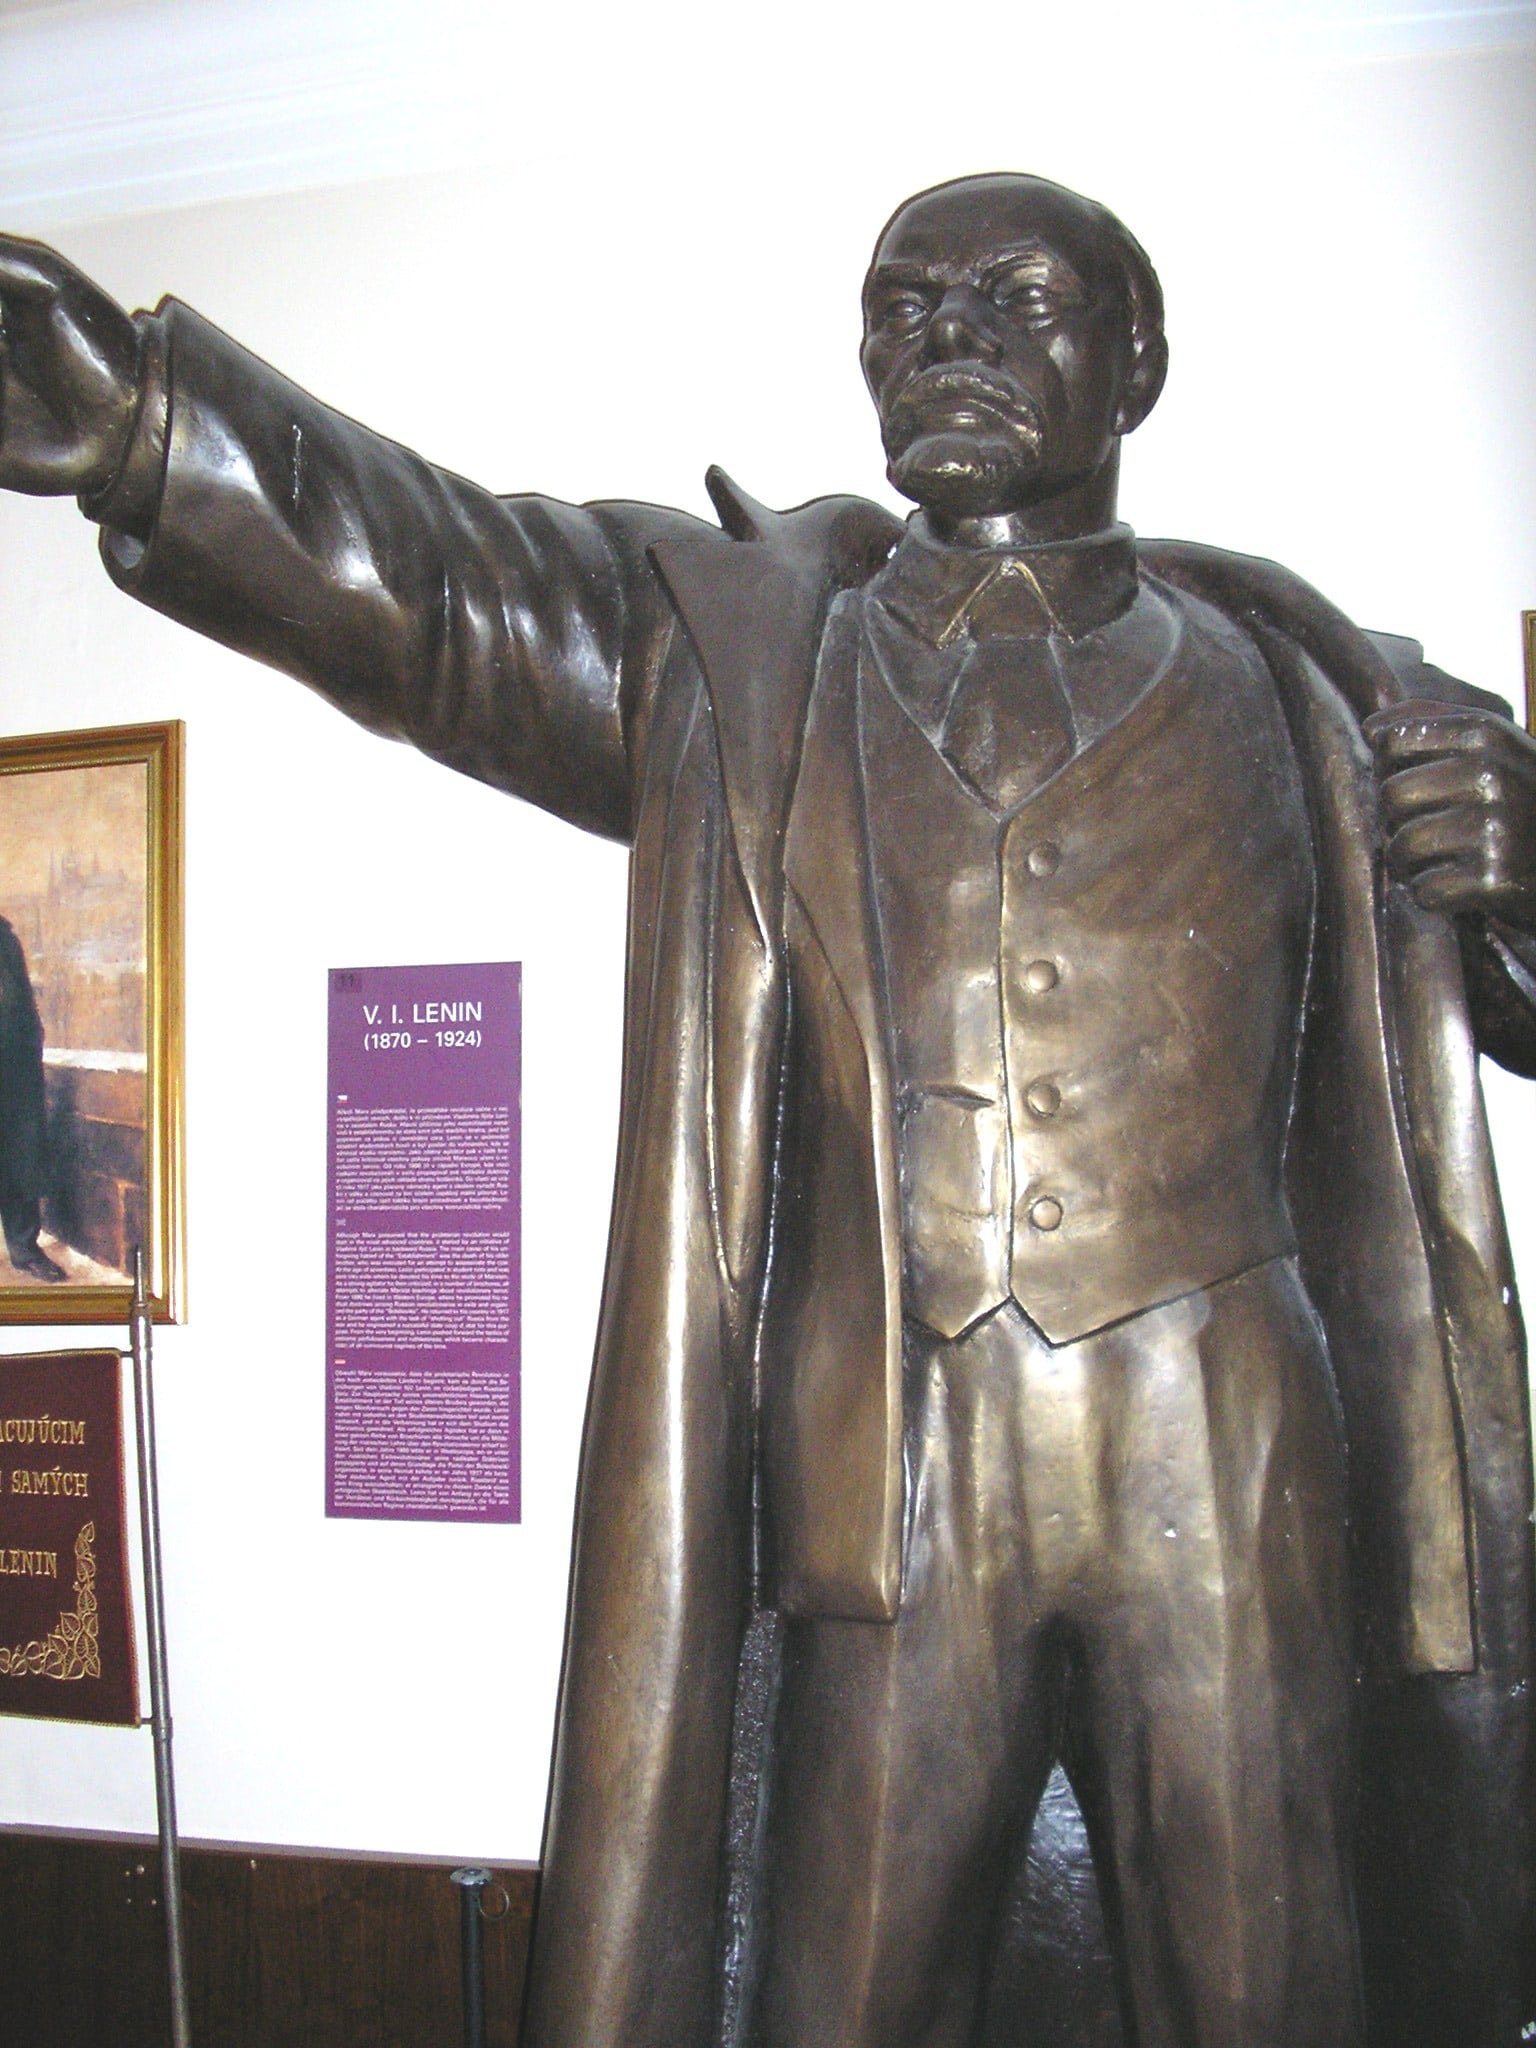 Statue of Lenin, Museum of Communism - Top 10 Things to See and Do in Prague